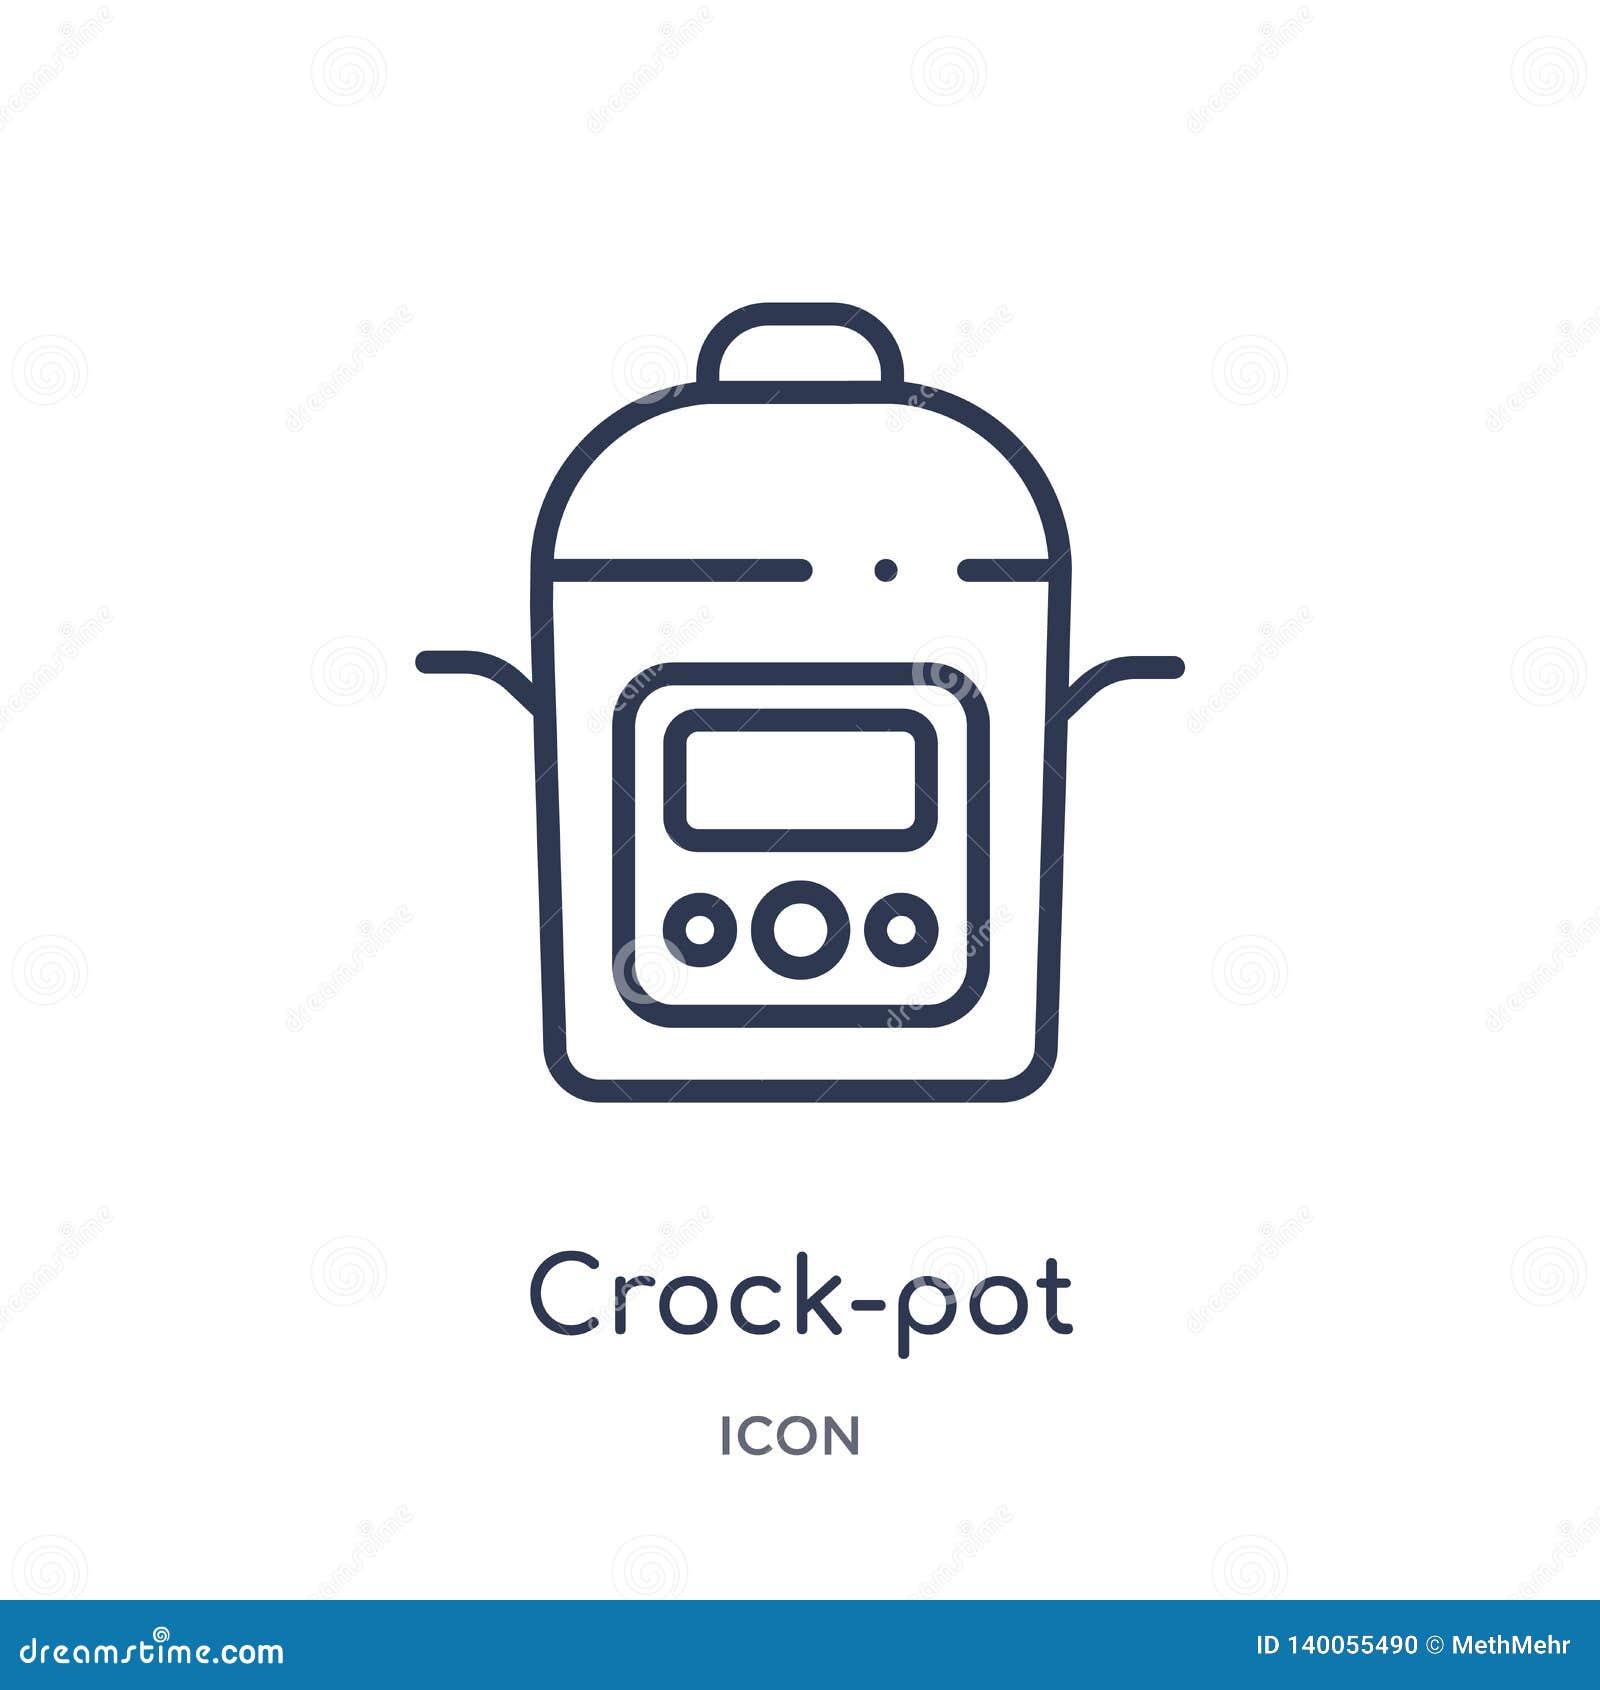 Instant pot screen icons